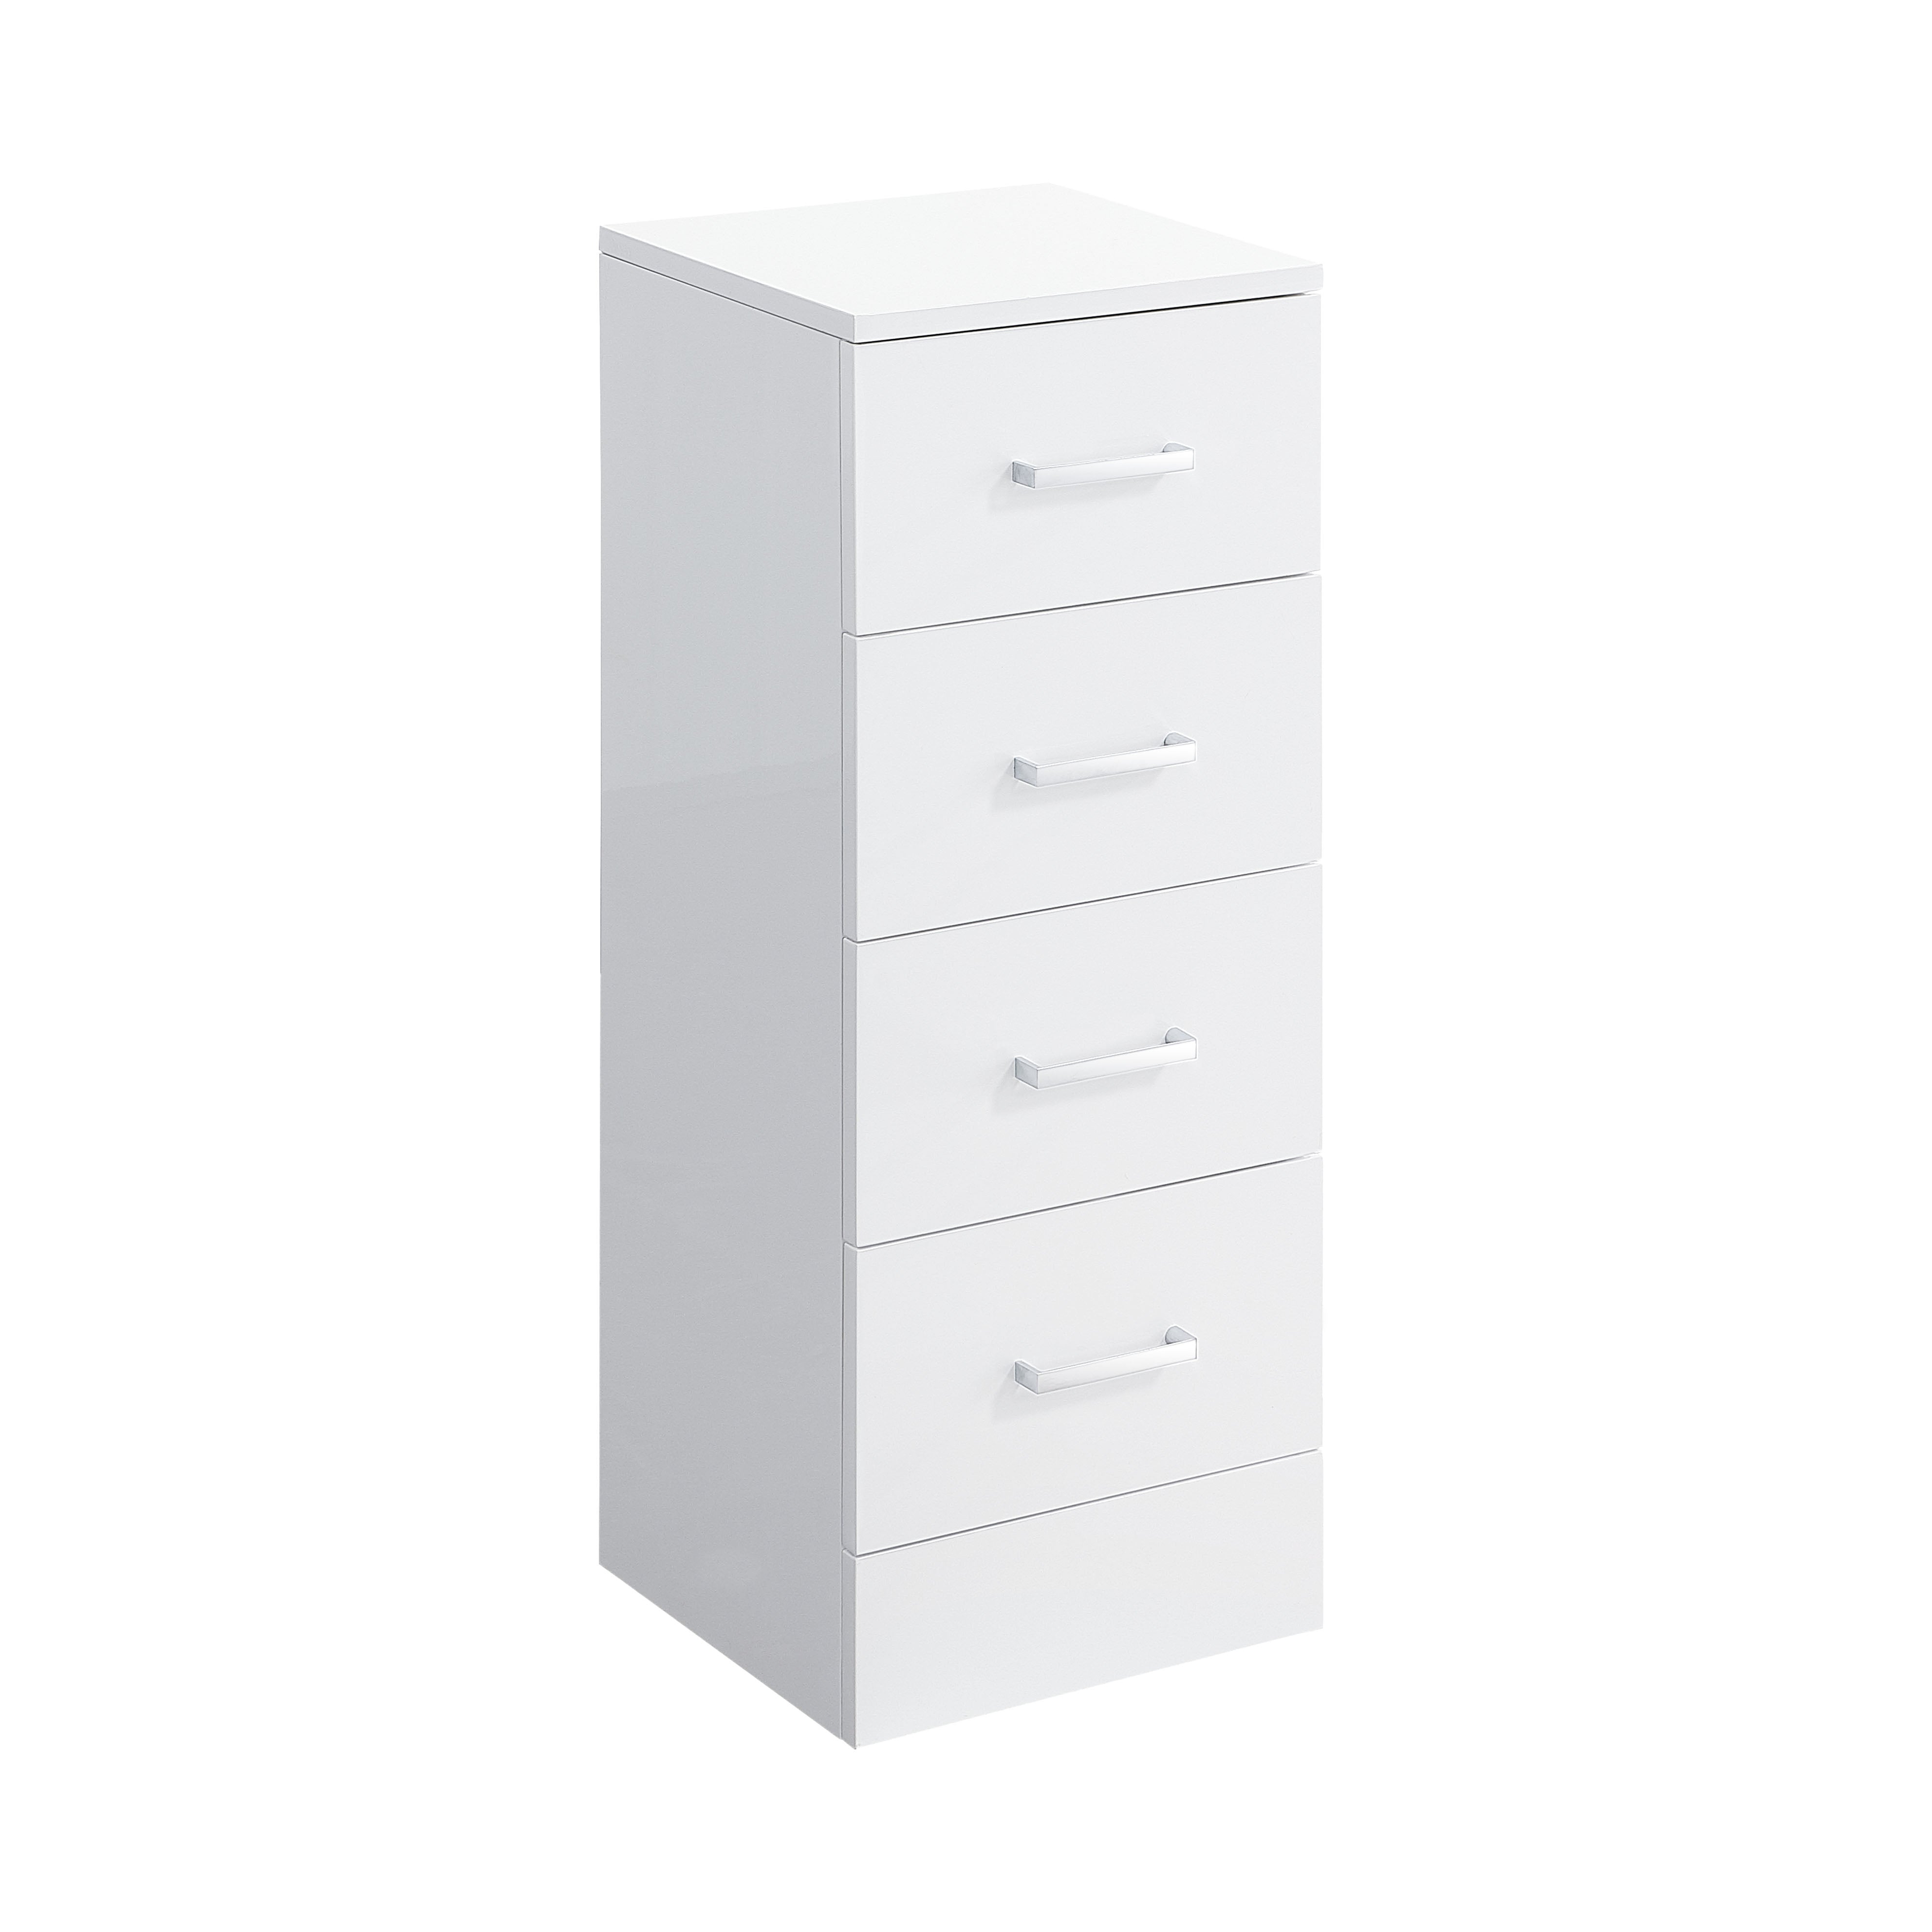 Mars 4 Drawer Storage Unit in Gloss White - Stylish and Modern Bathroom Storage Solution, Trendy Home Decor, Space-Saving Furniture, Ideal for Organizing Bathroom Essentials.